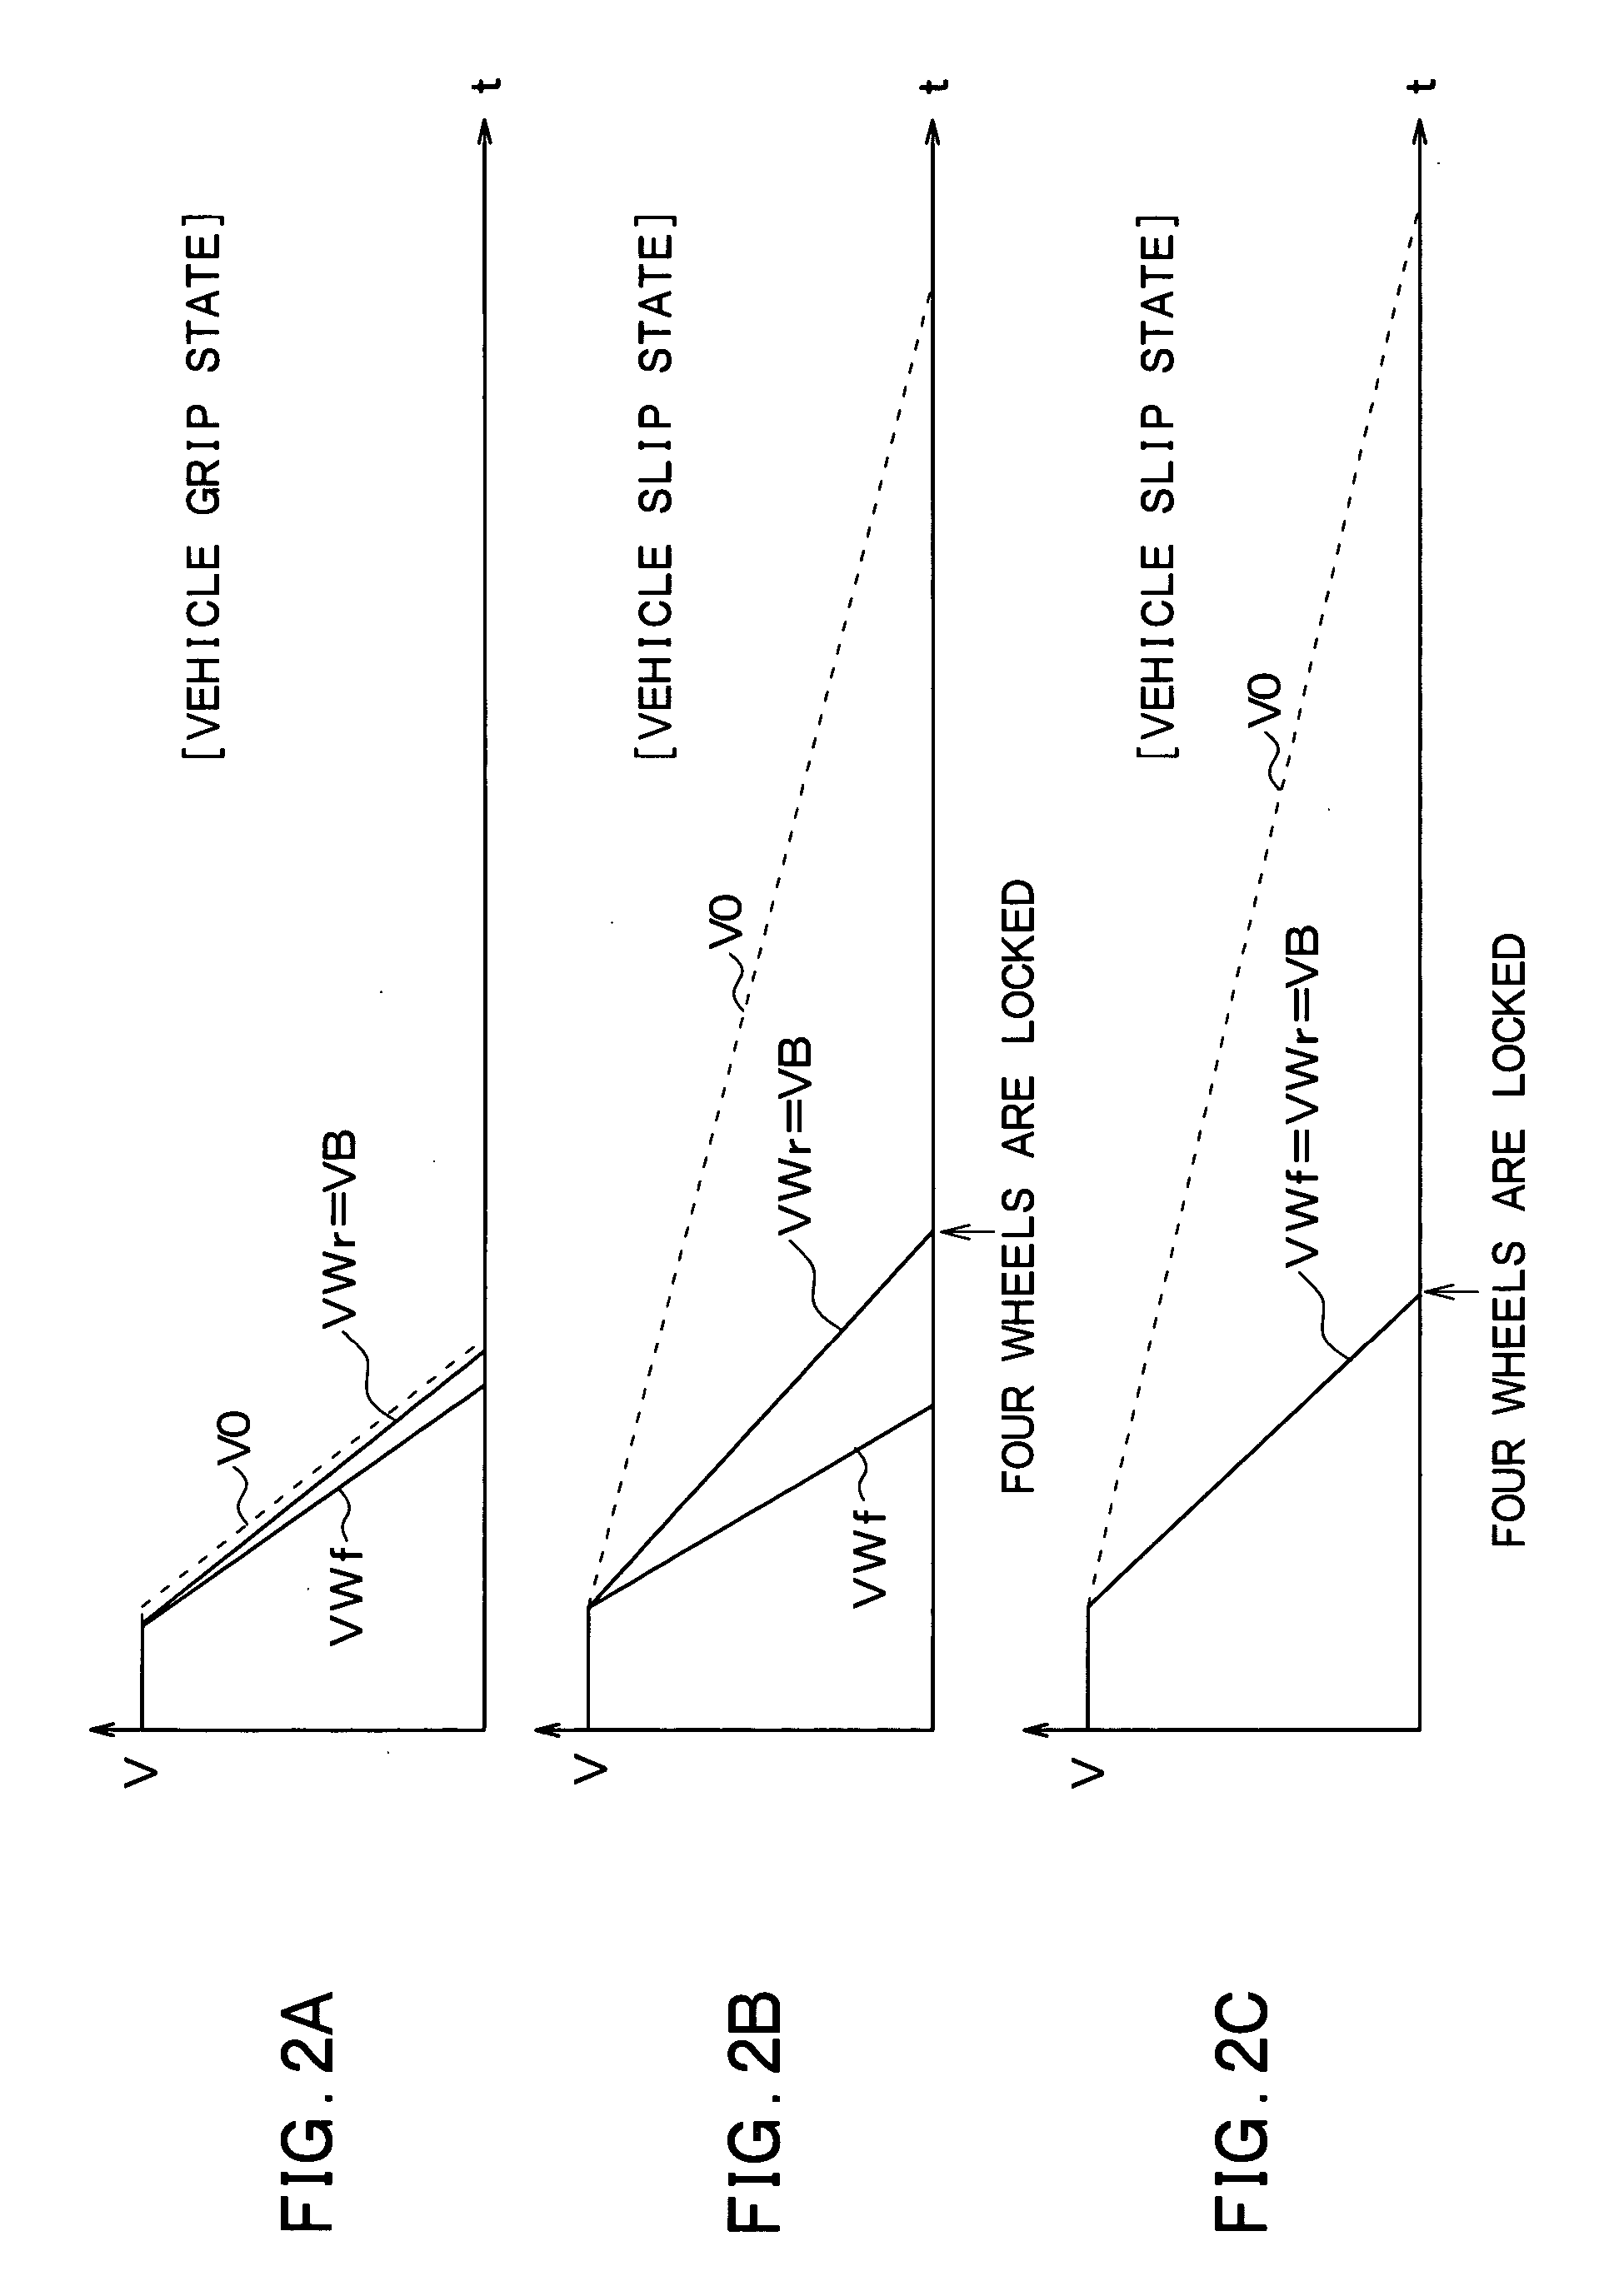 Vehicle slip state determination system and traveling state control system